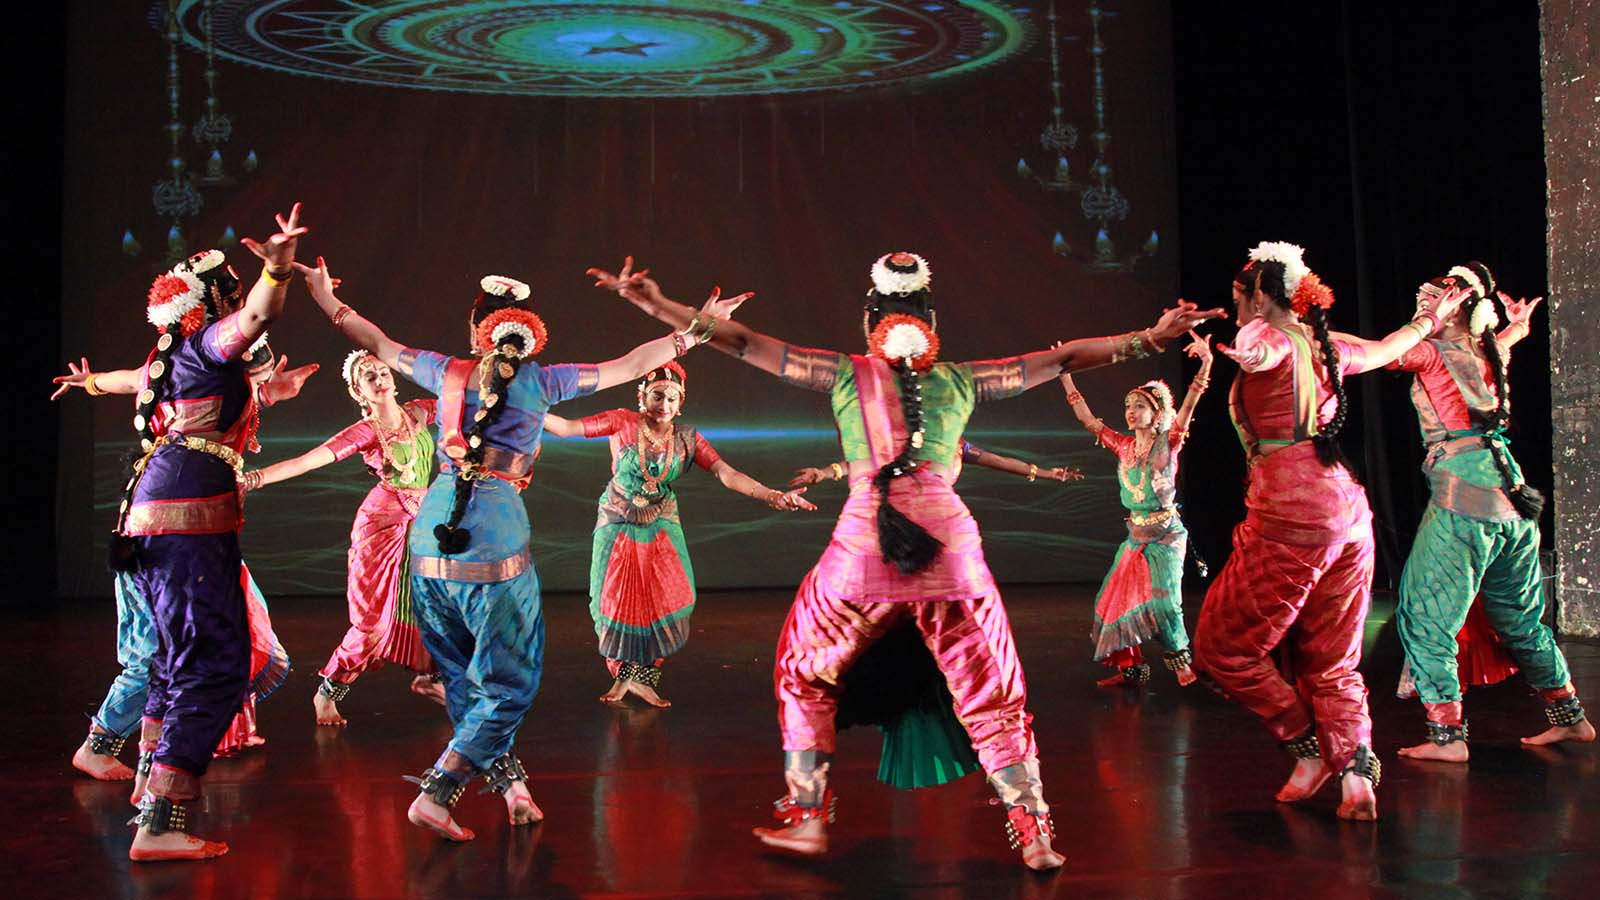 A group of young women in traditional Indian dress dancing on stage in a circle